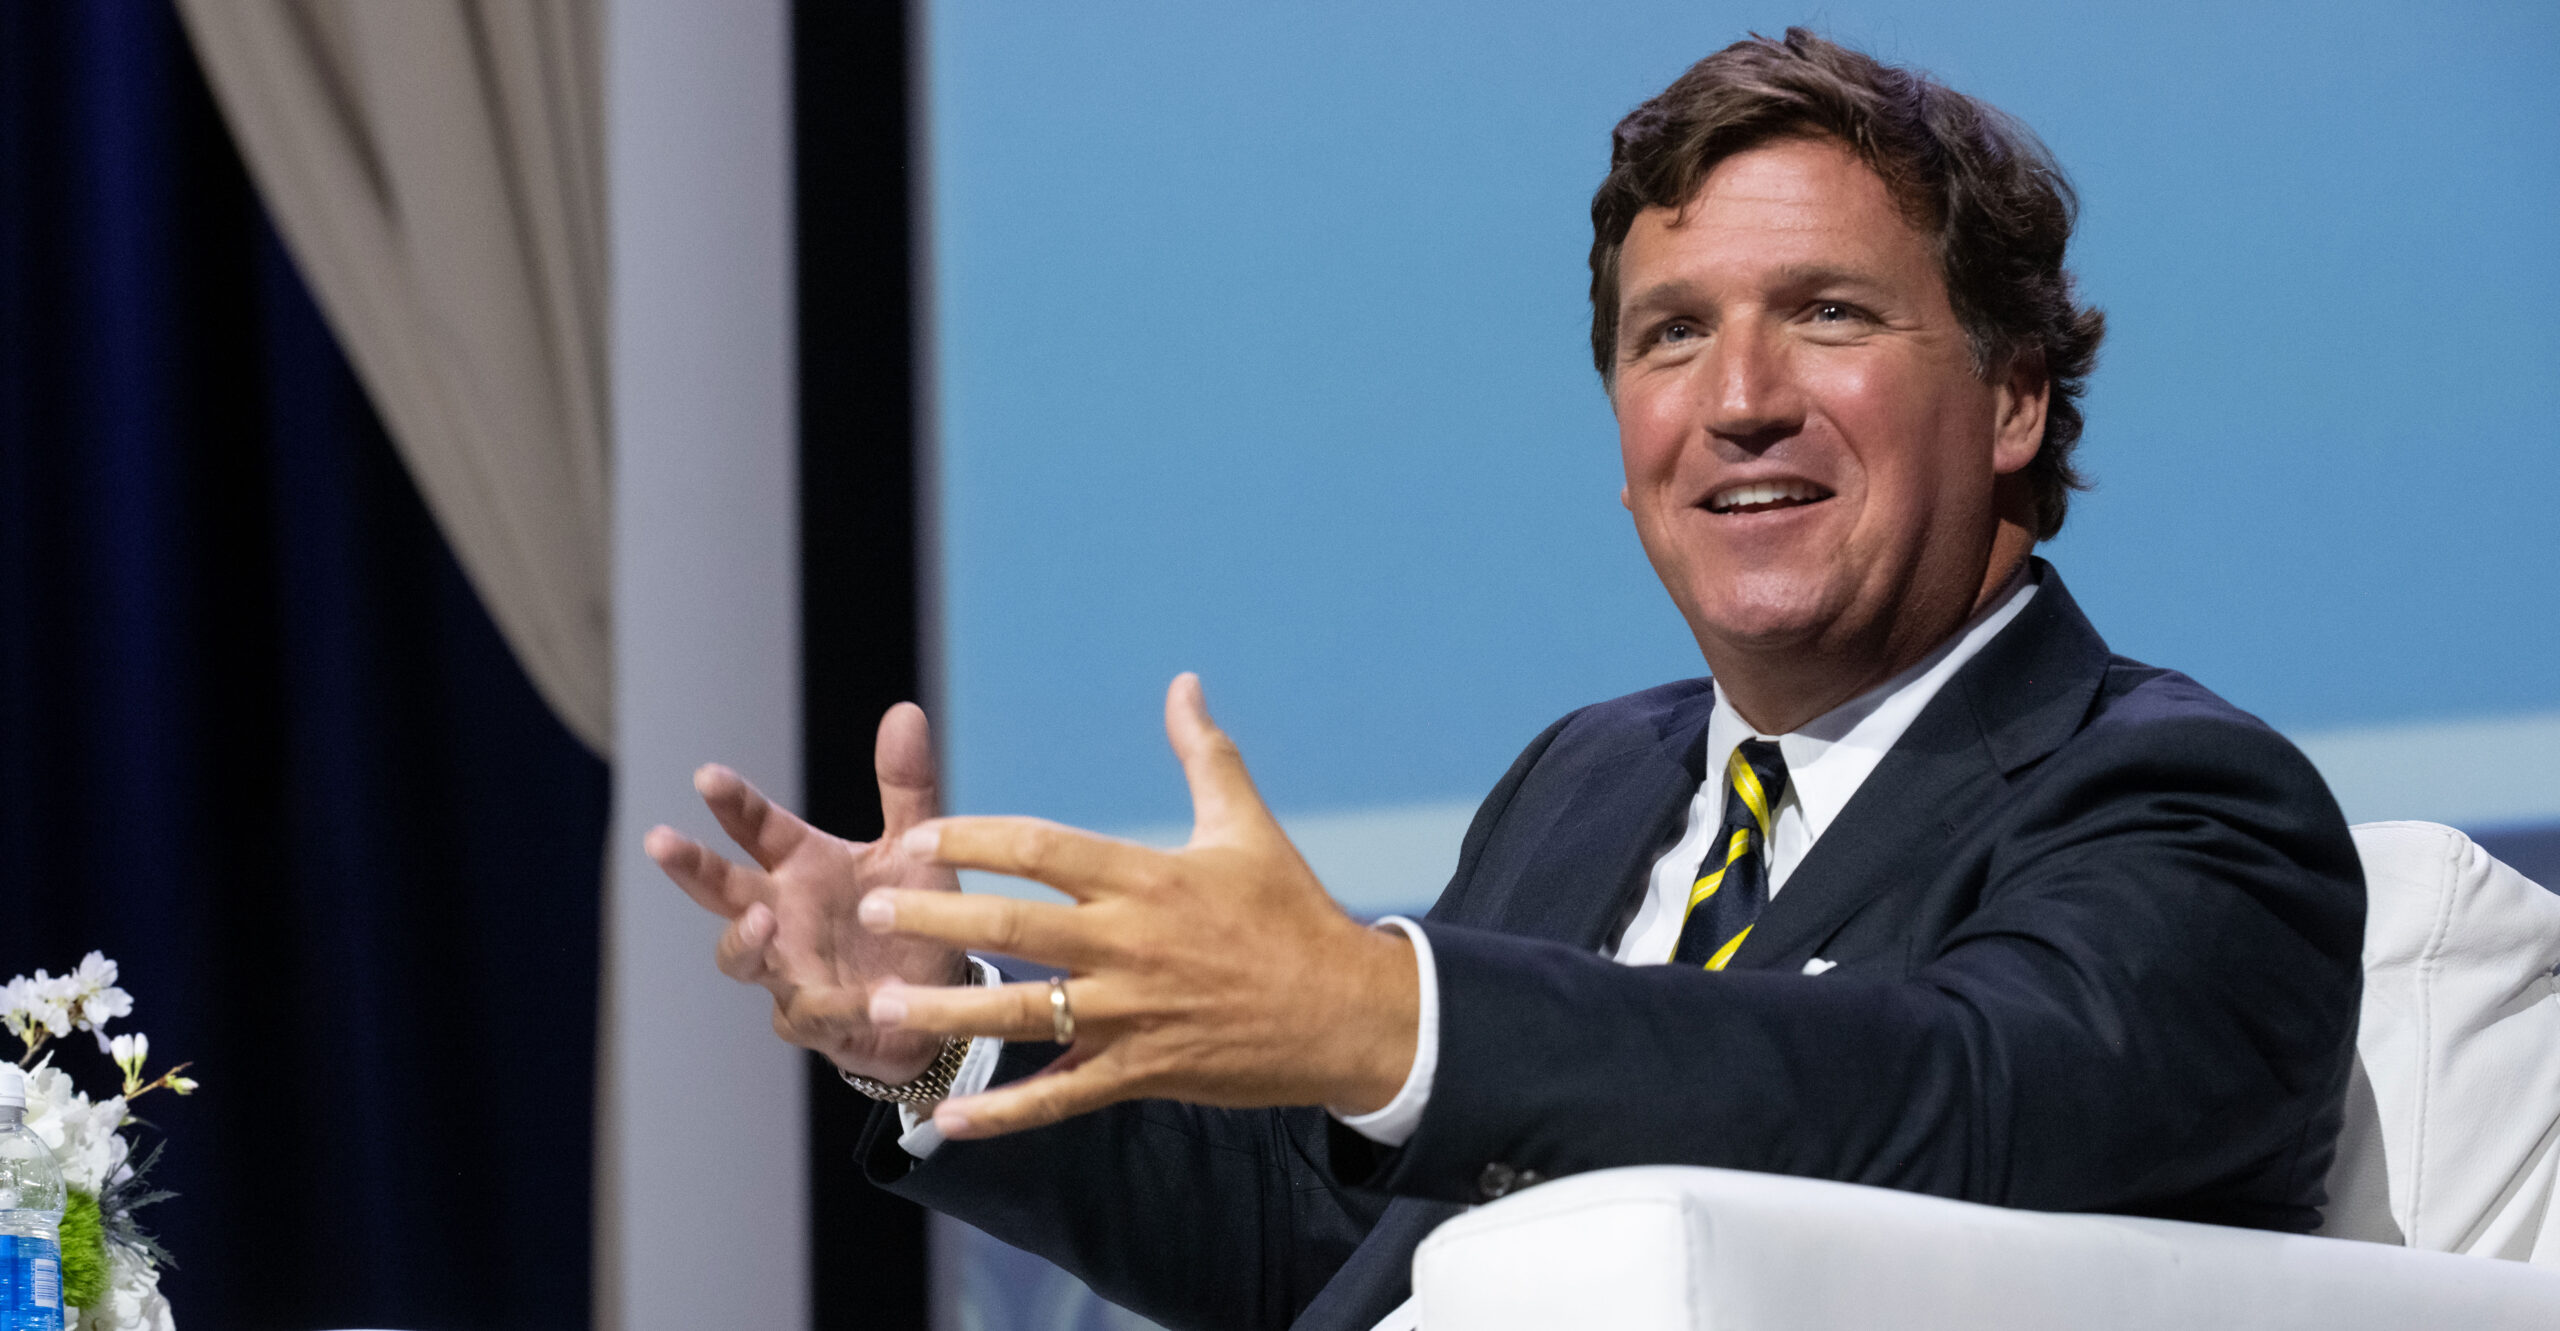 ICYMI: More Americans Need to Stand Up to the Left's Insanity, Tucker Carlson Says at Heritage Foundation Gala